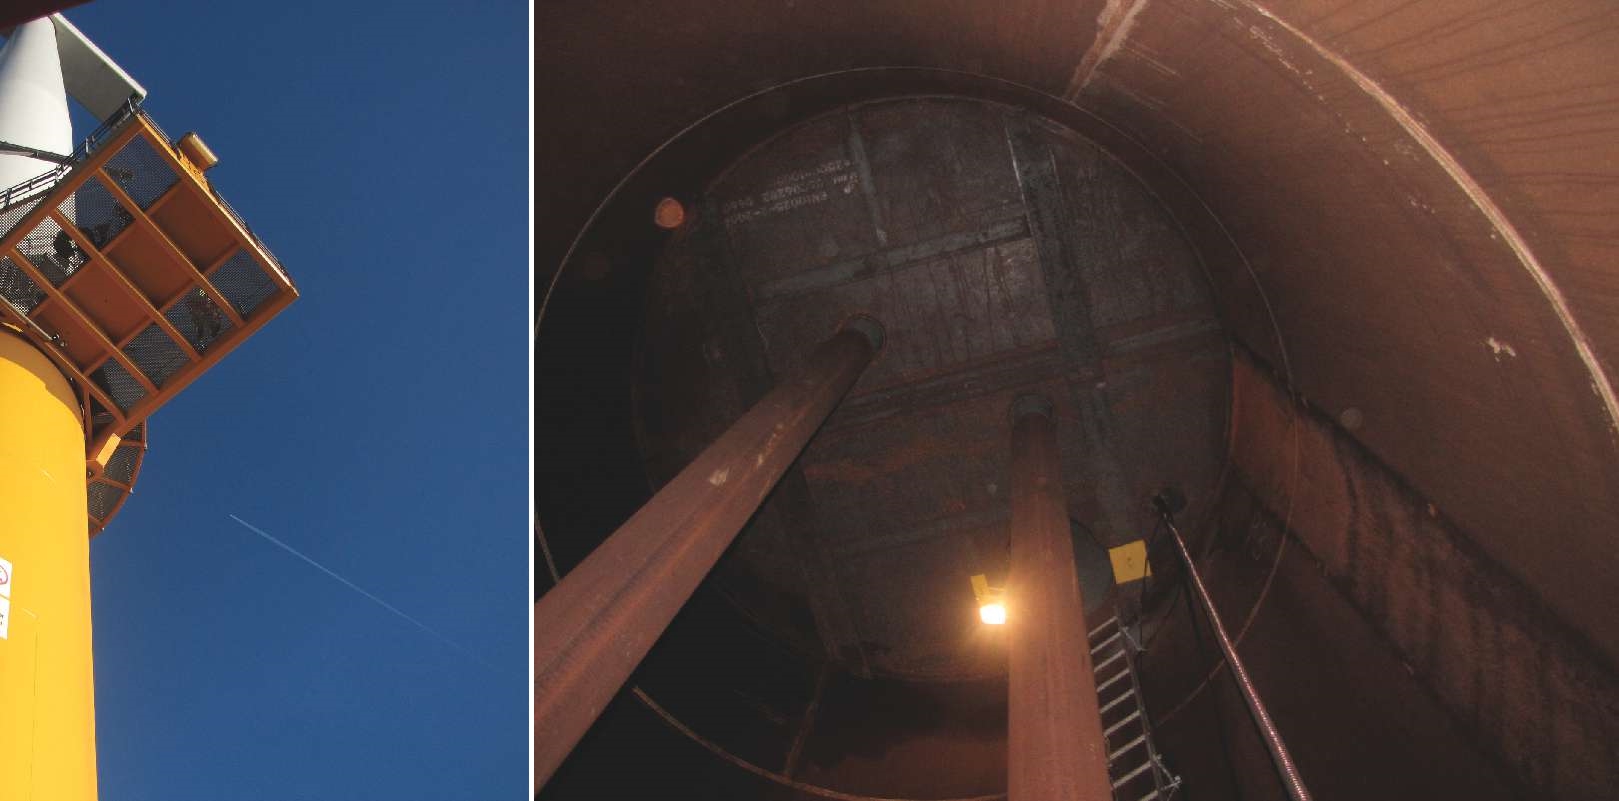 Left, the wind turbine monopile. Right, the sealed portion of the monopile below the lower platform. Photos courtesy of Alex Delwiche.